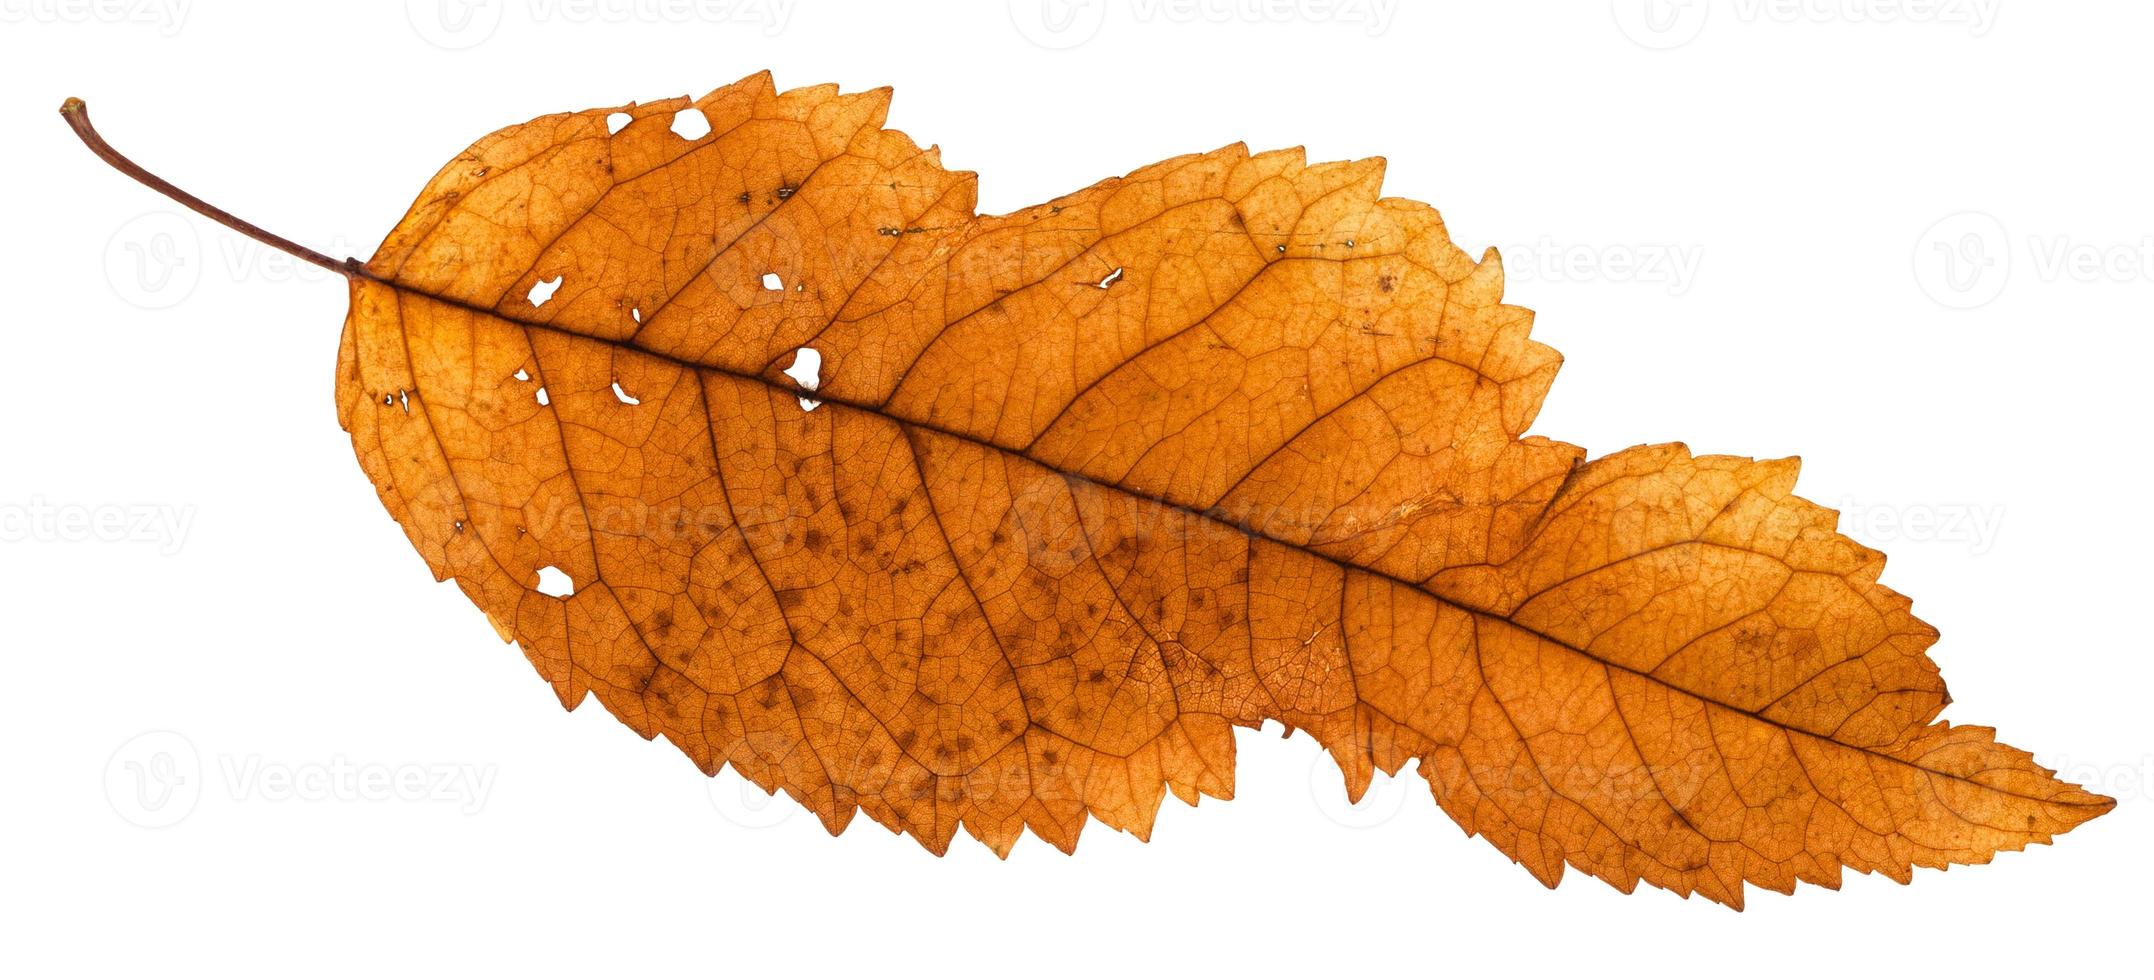 broken leaf of ash tree isolated on white photo